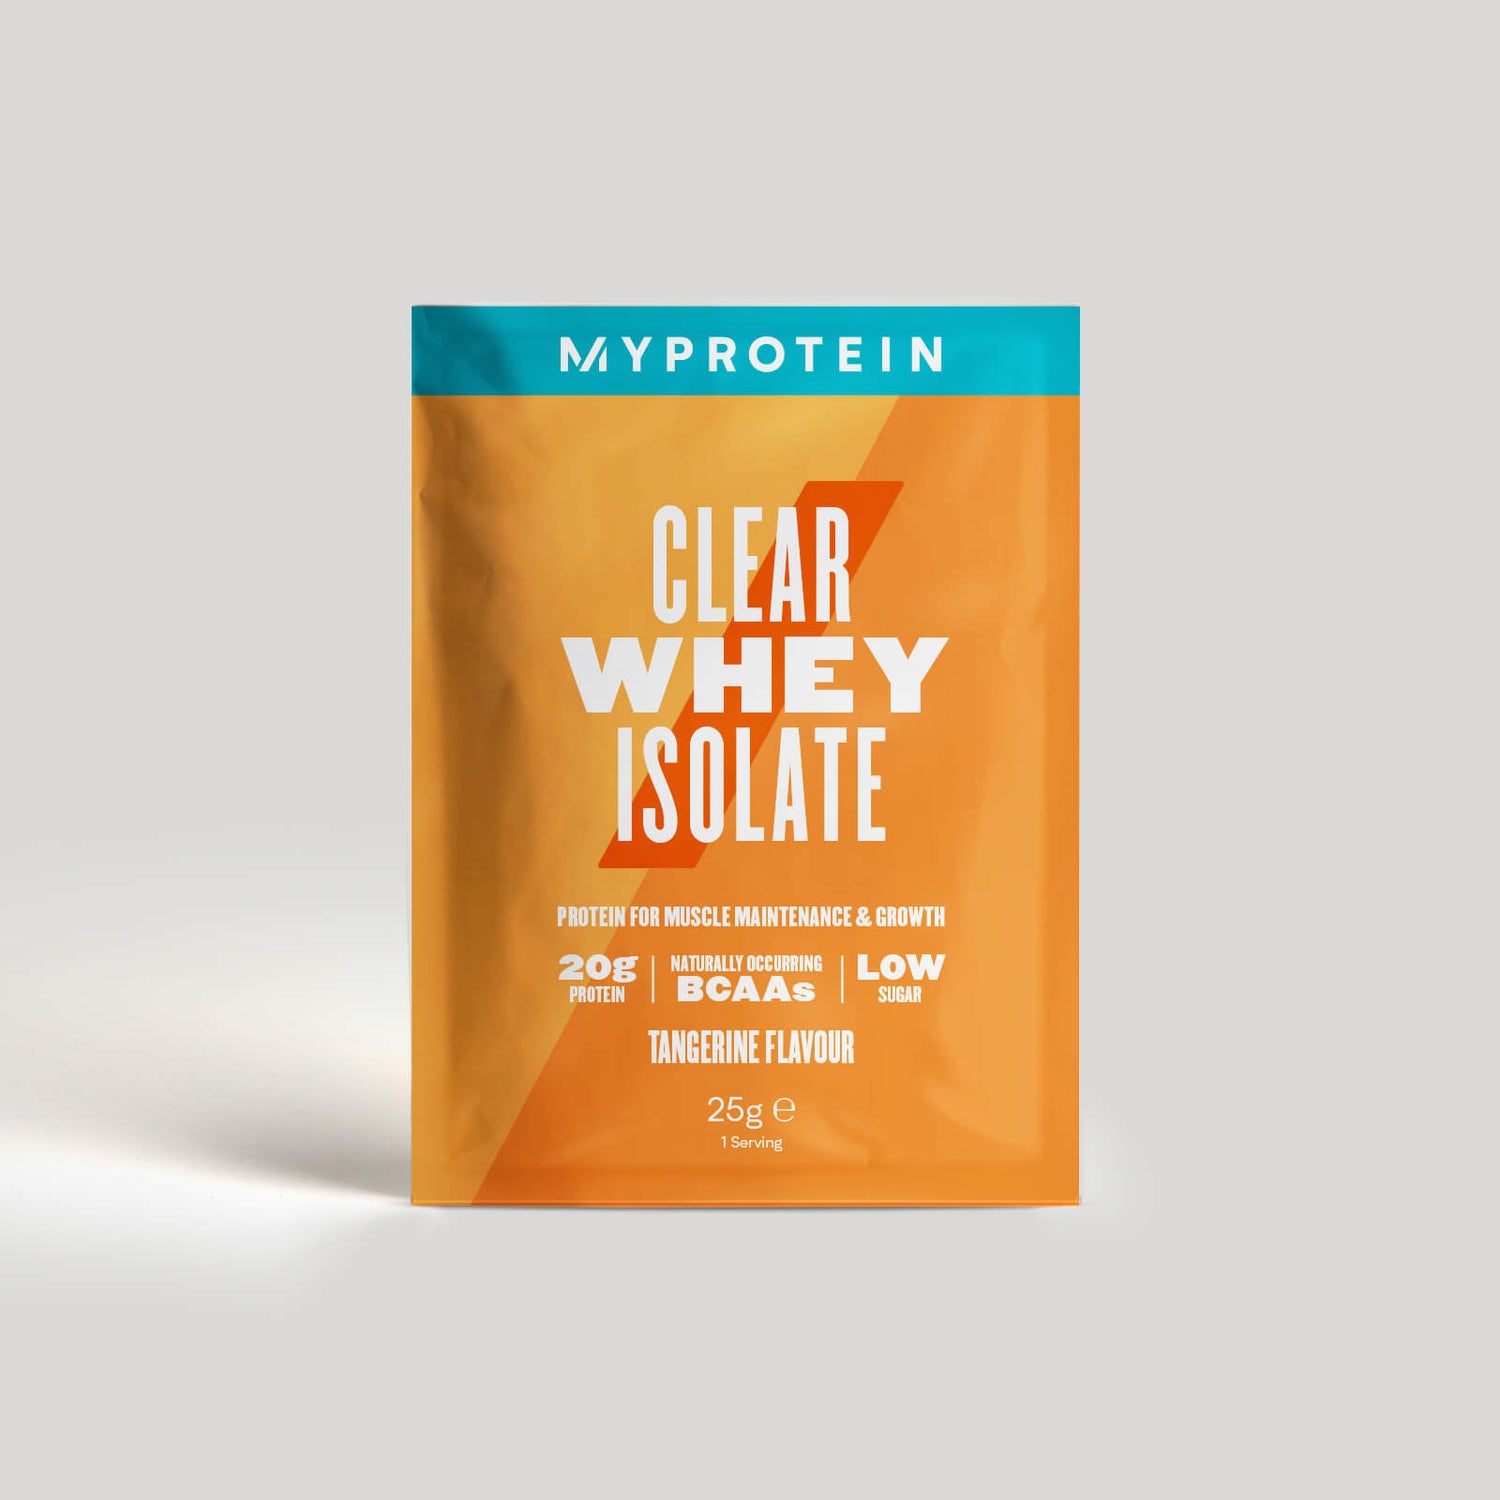 Myprotein Clear Whey Isolate (Sample) - 1份装 - Tangerine